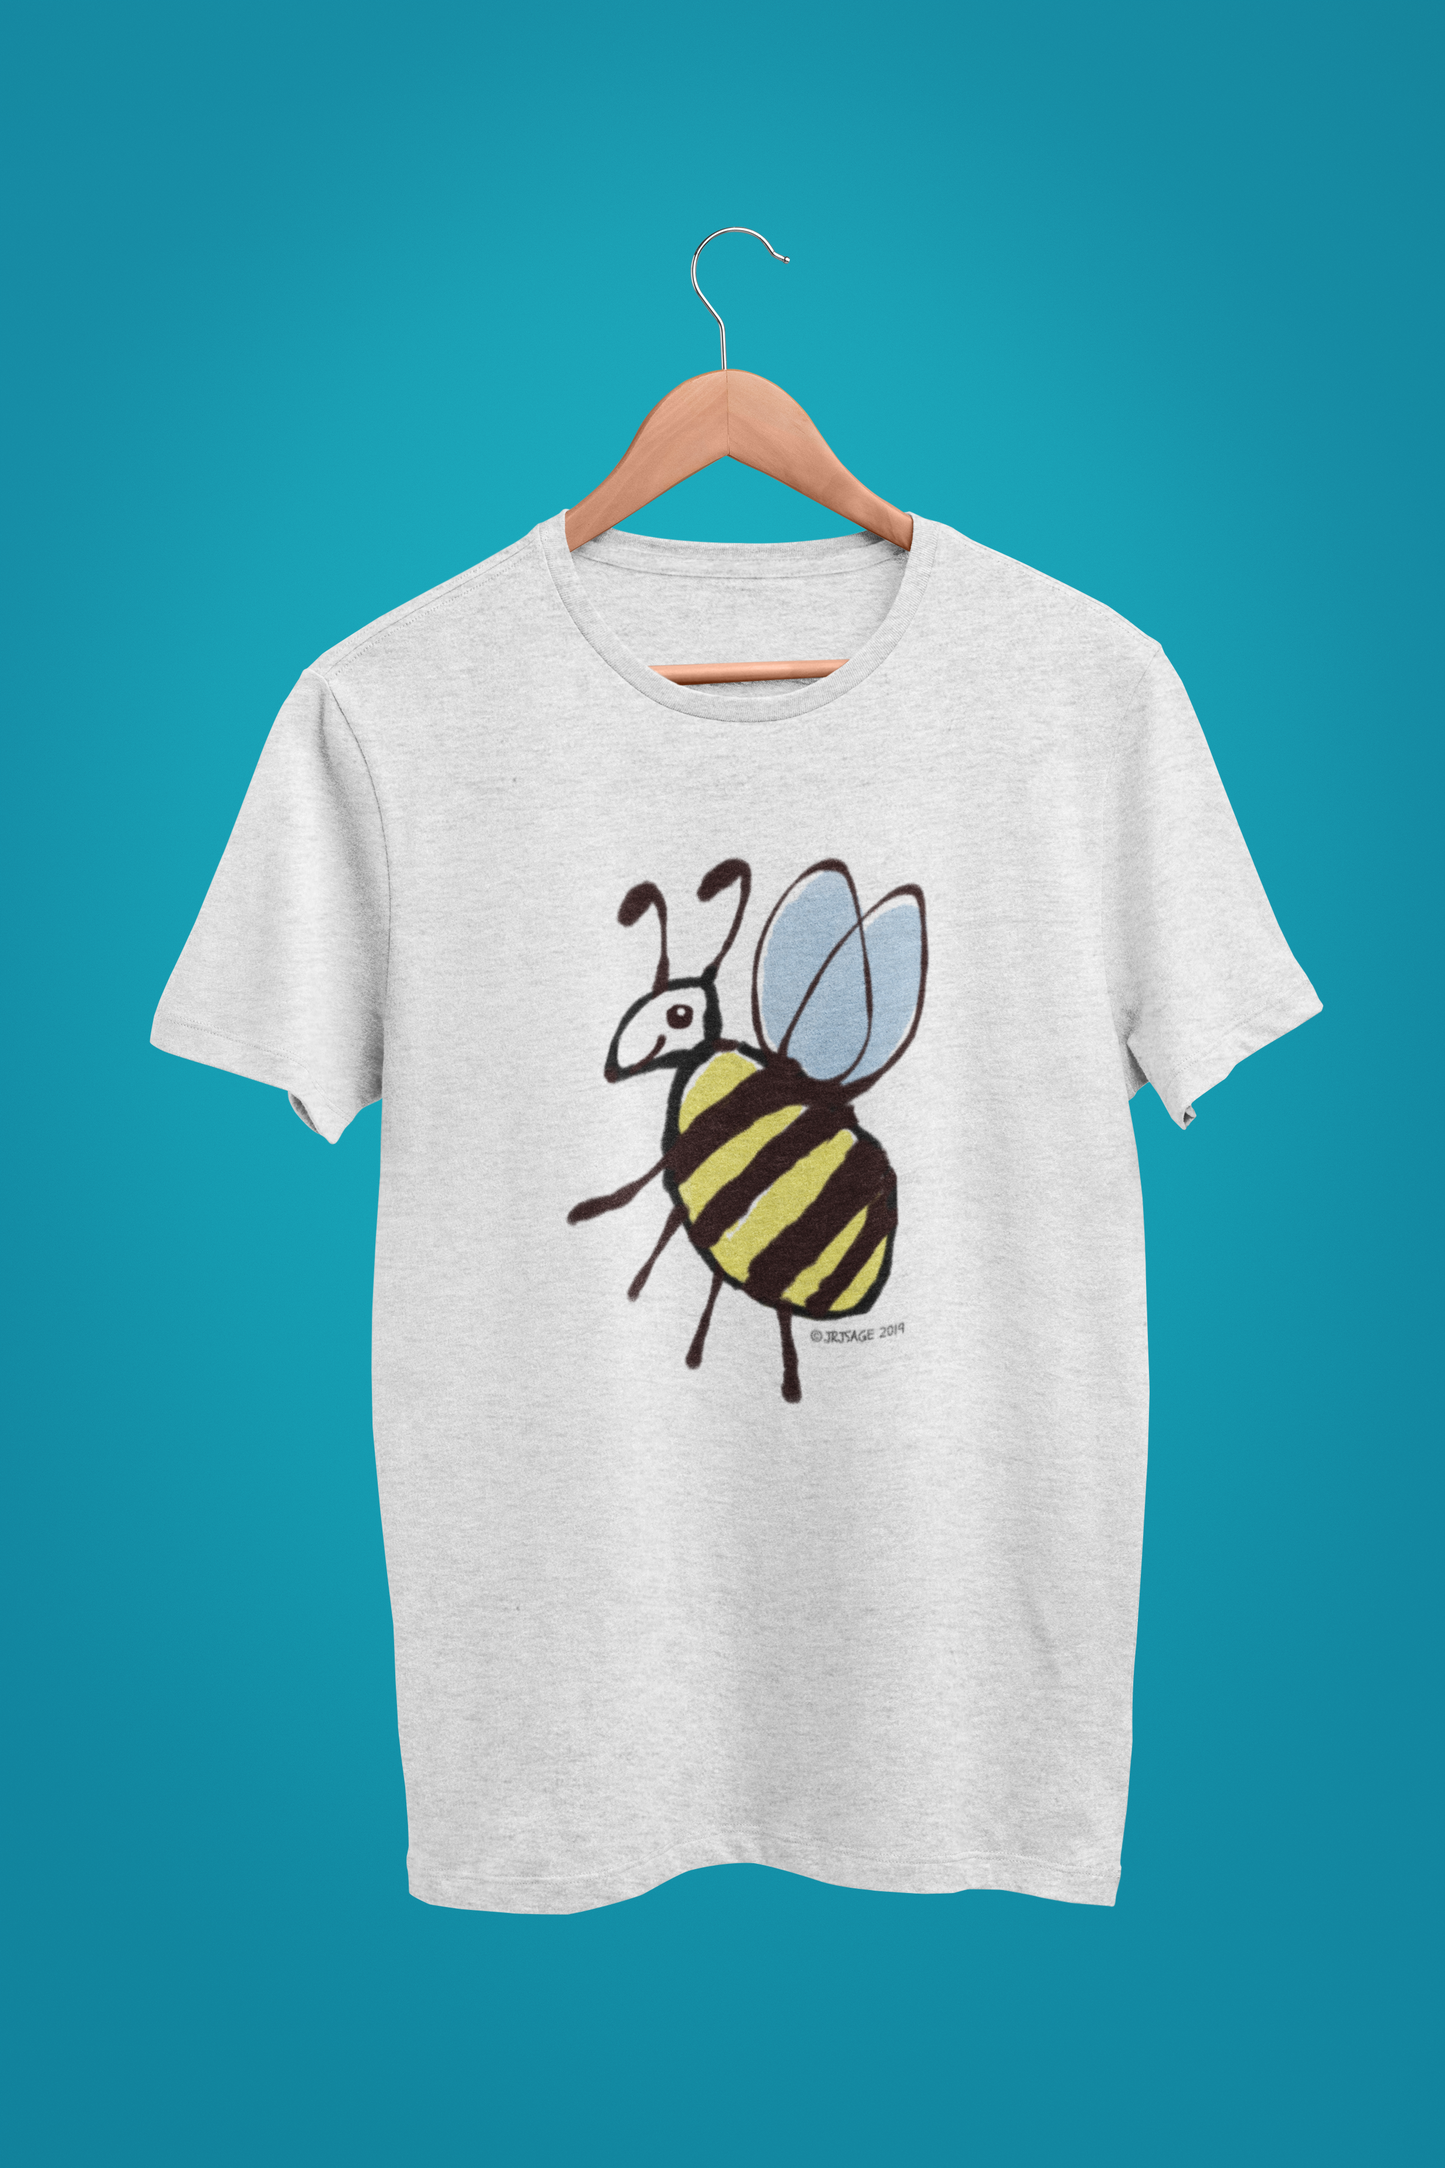 Bee T-shirt - Cute Busy Bee illustrated heather grey vegan cotton t-shirts by Hector and Bone